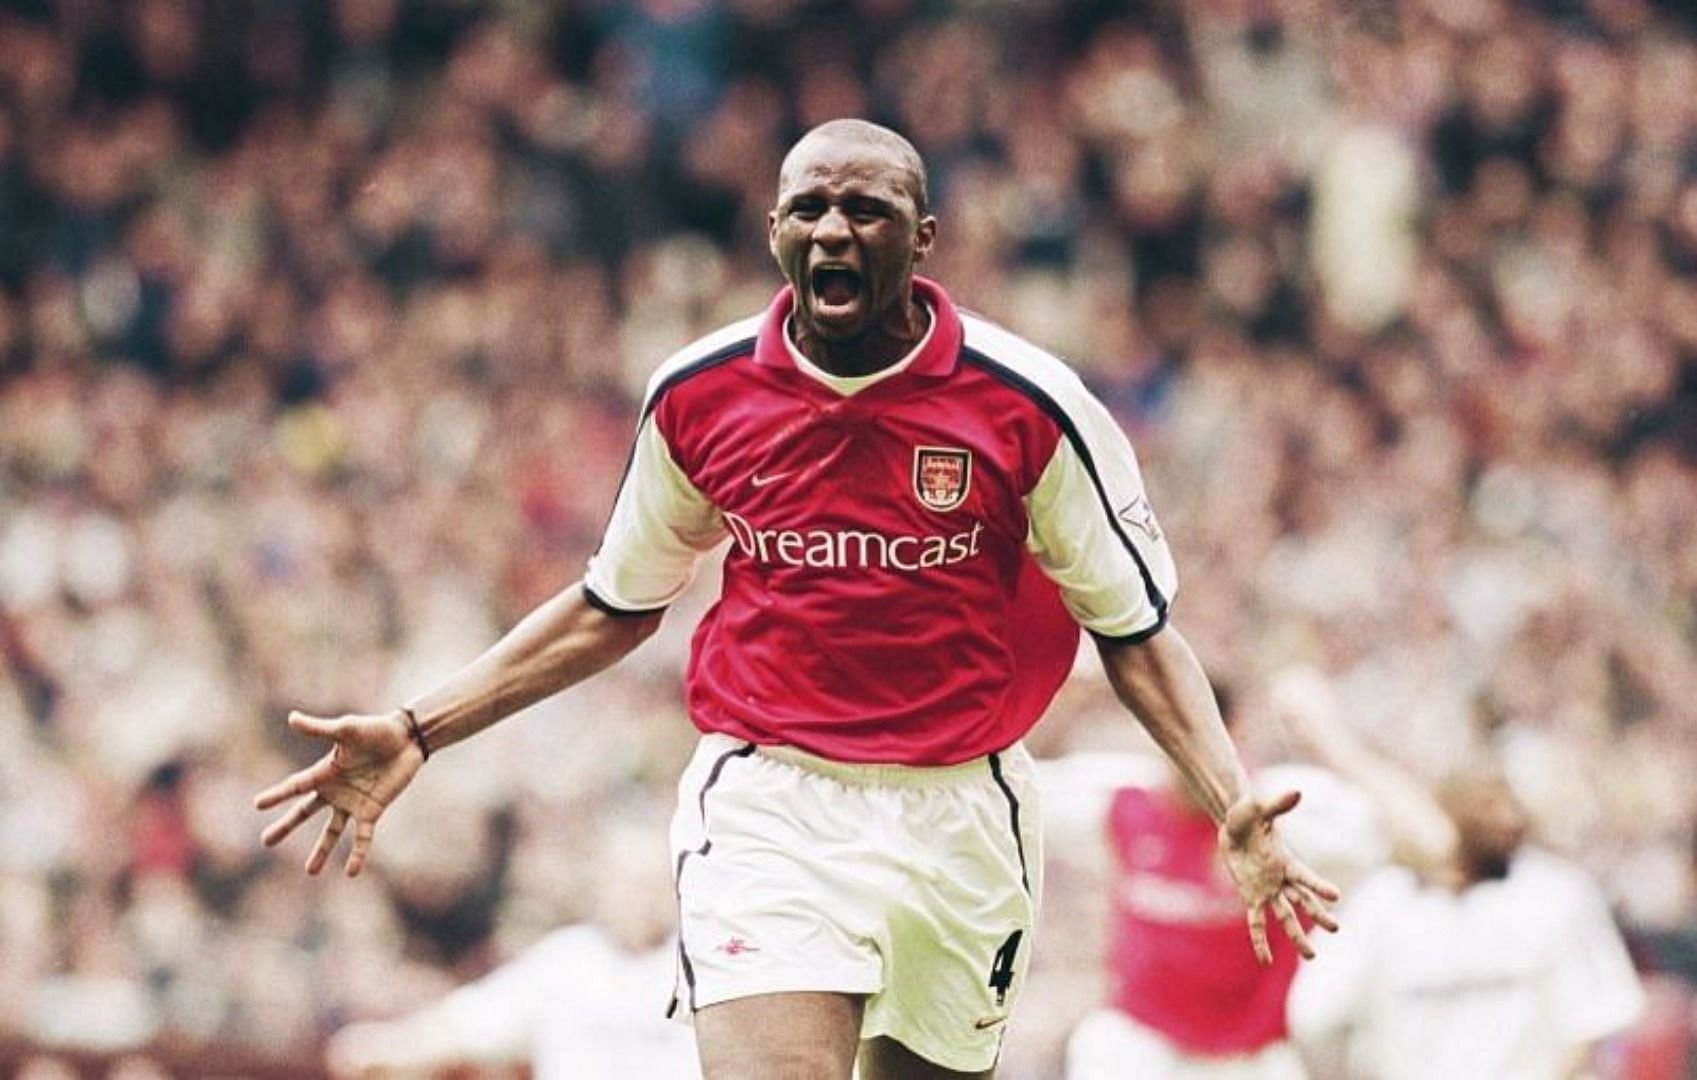 Patrick Vieira was a key player for Arsenal in the 00s.